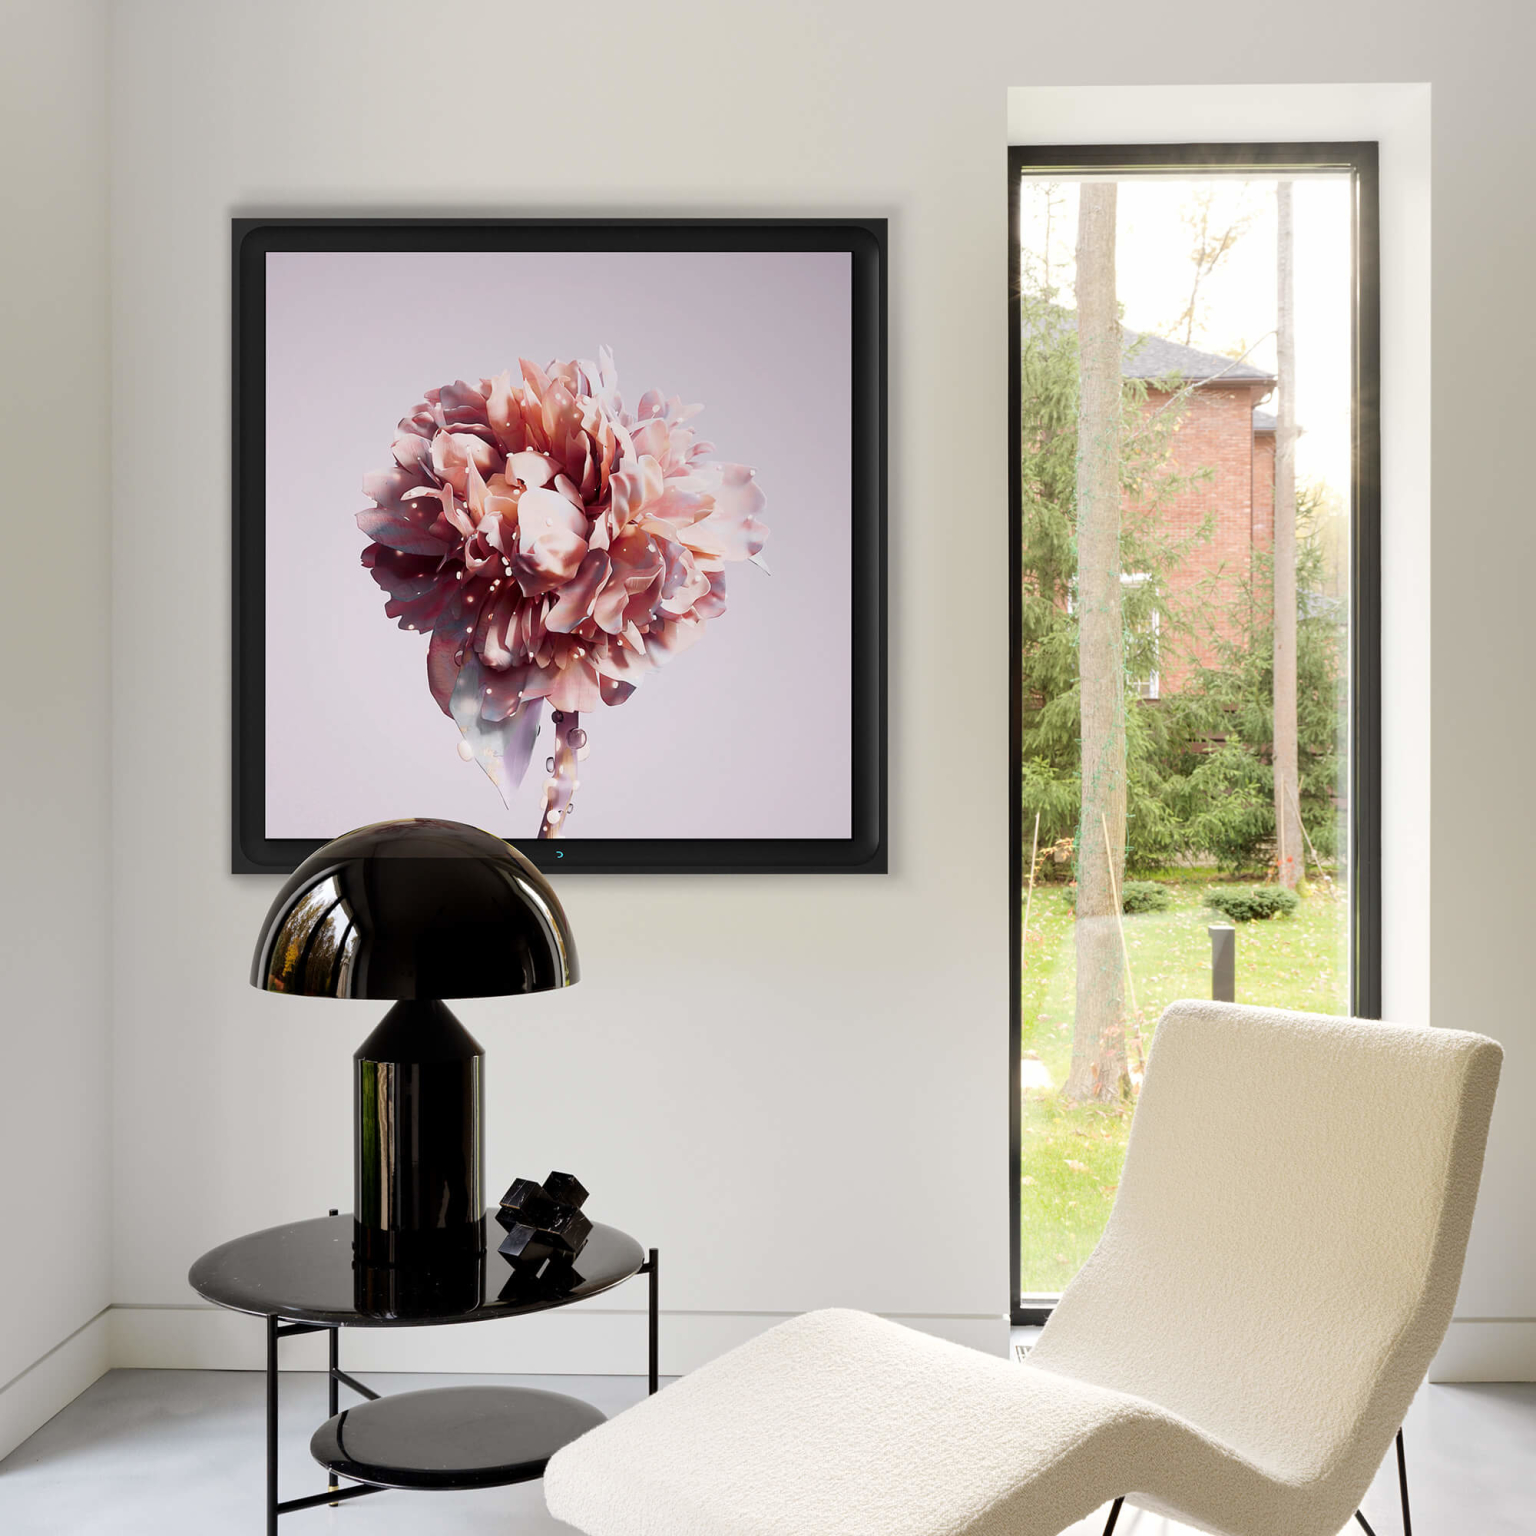 A Danvas frame hangs in a bright, white room full of natural light. The frame features an artwork by Gonzalo Miranda.